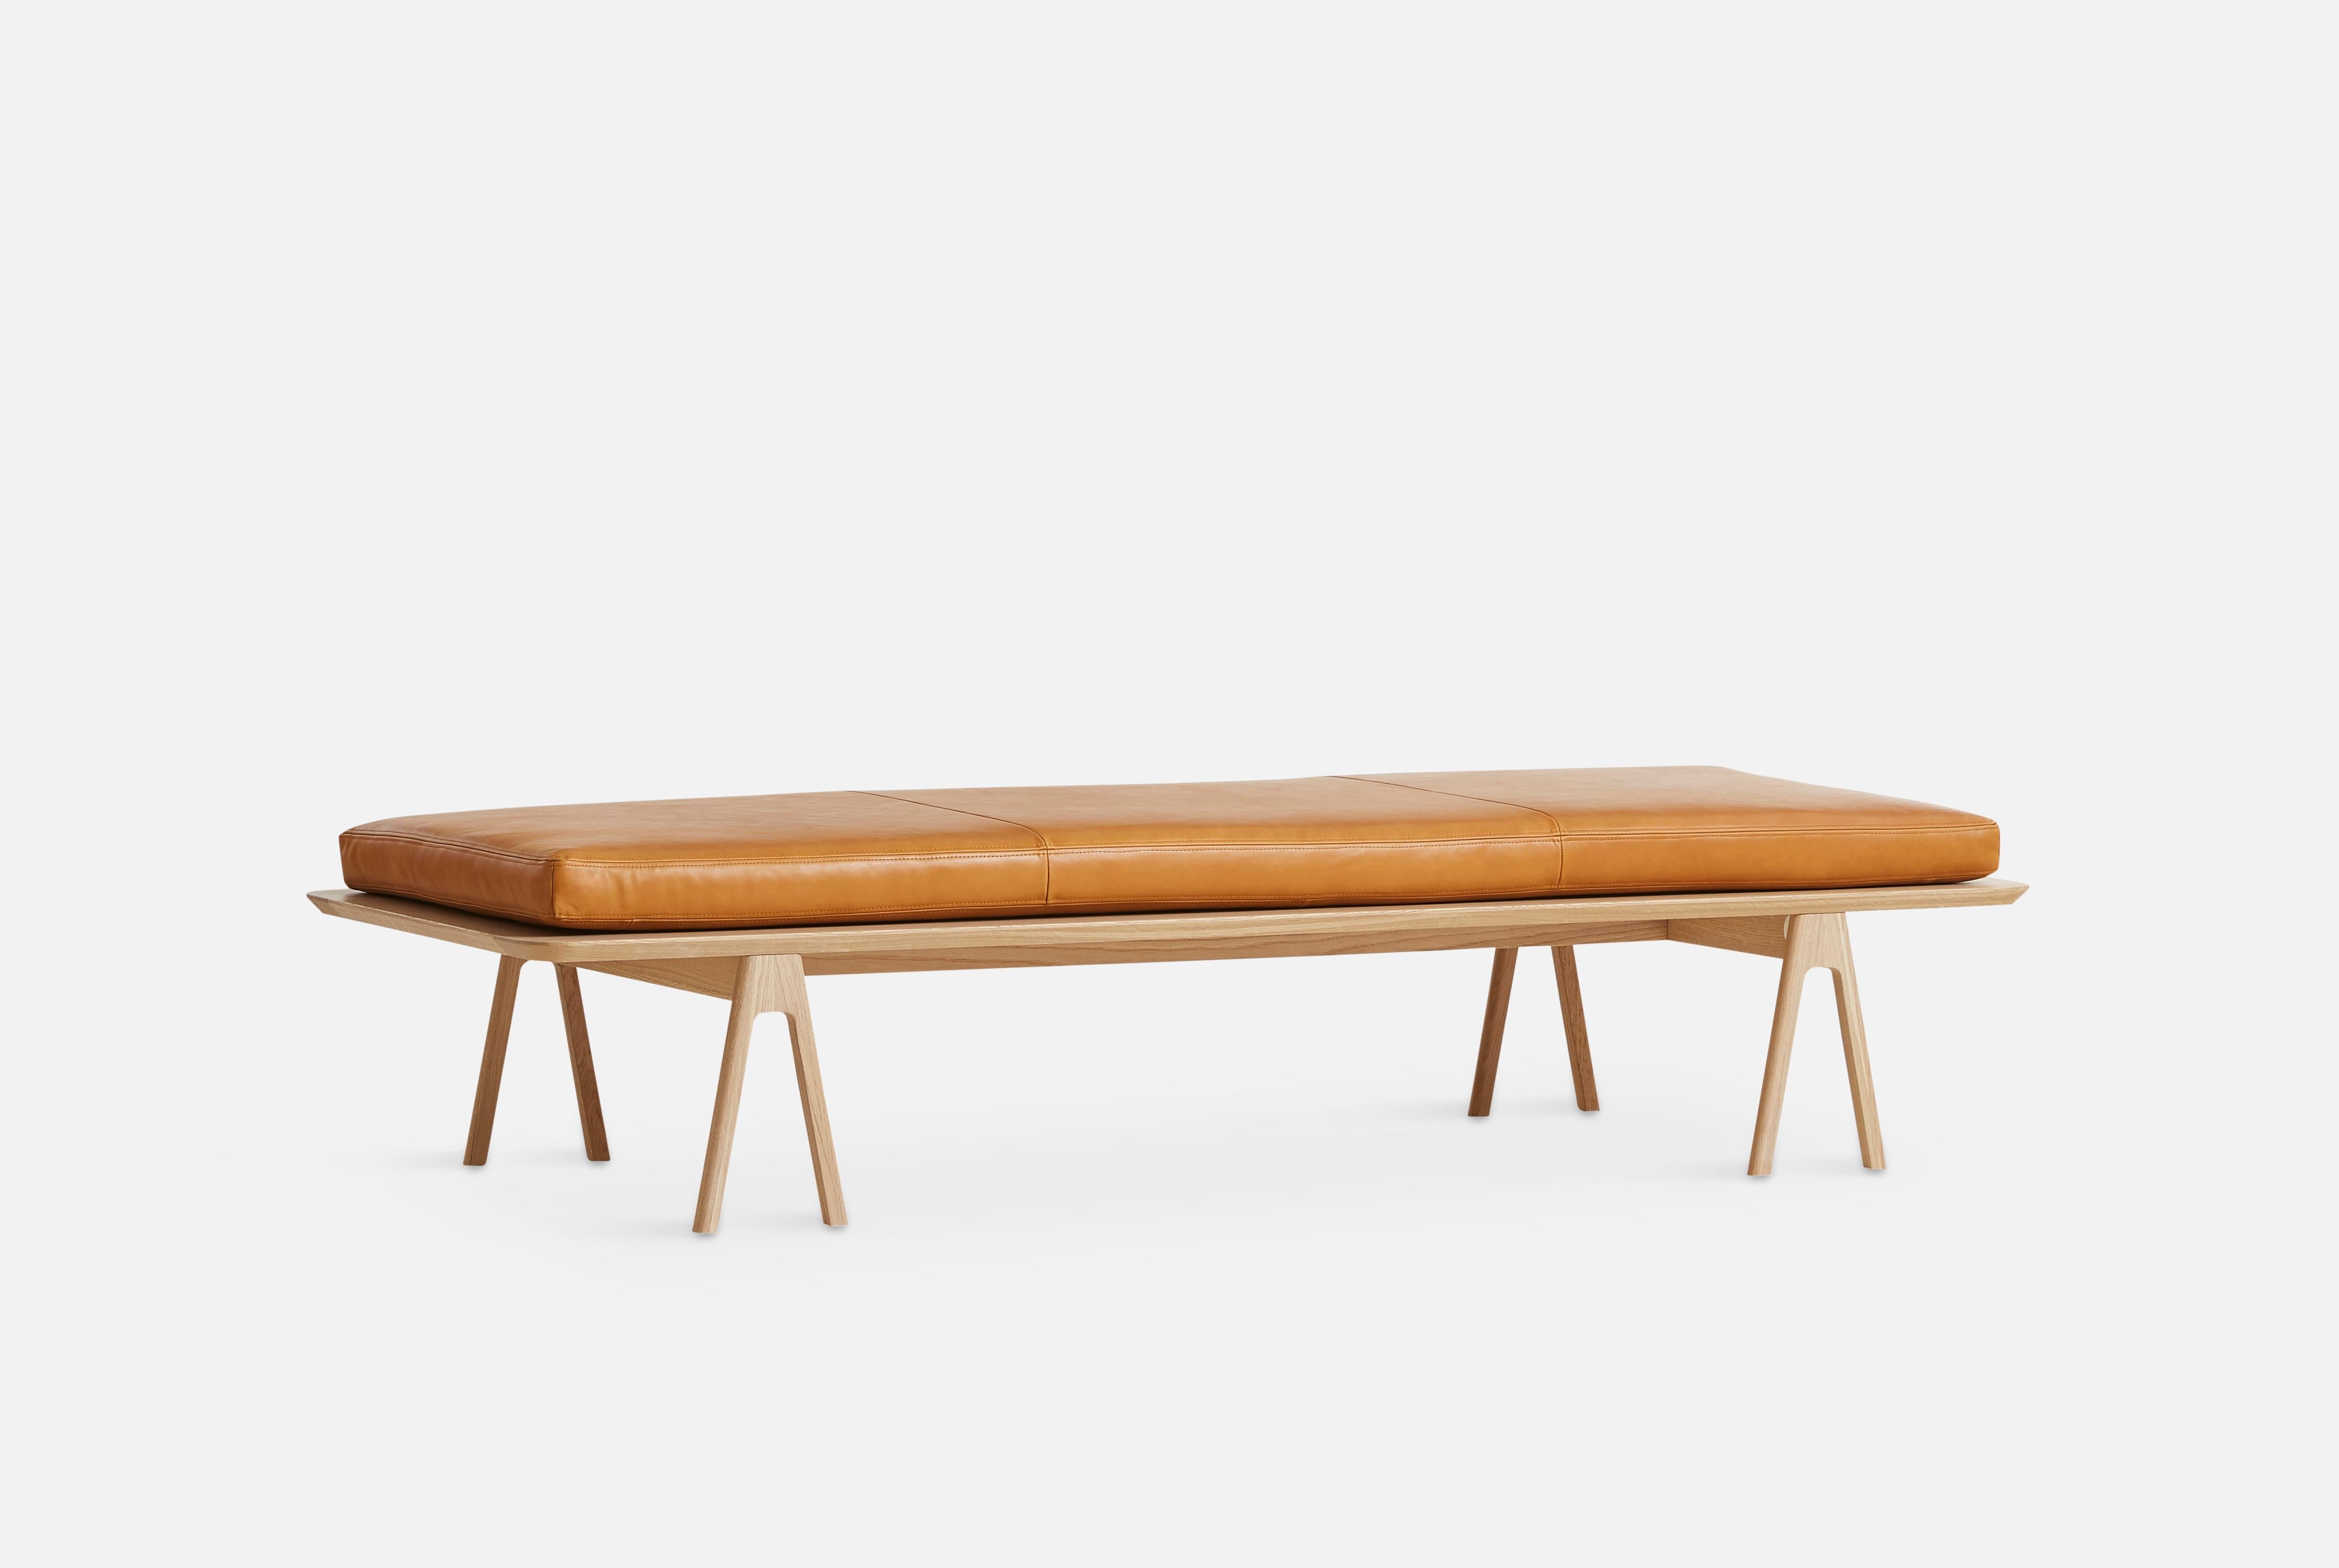 Oak Cognac leather level daybed by Msds Studio
Materials: Camo leather, foam, oak.
Dimensions: D 76.5 x W 190 x H 41 cm

The founders, Mia and Torben Koed, decided to put their 30 years of experience into a new project. It was time for a change